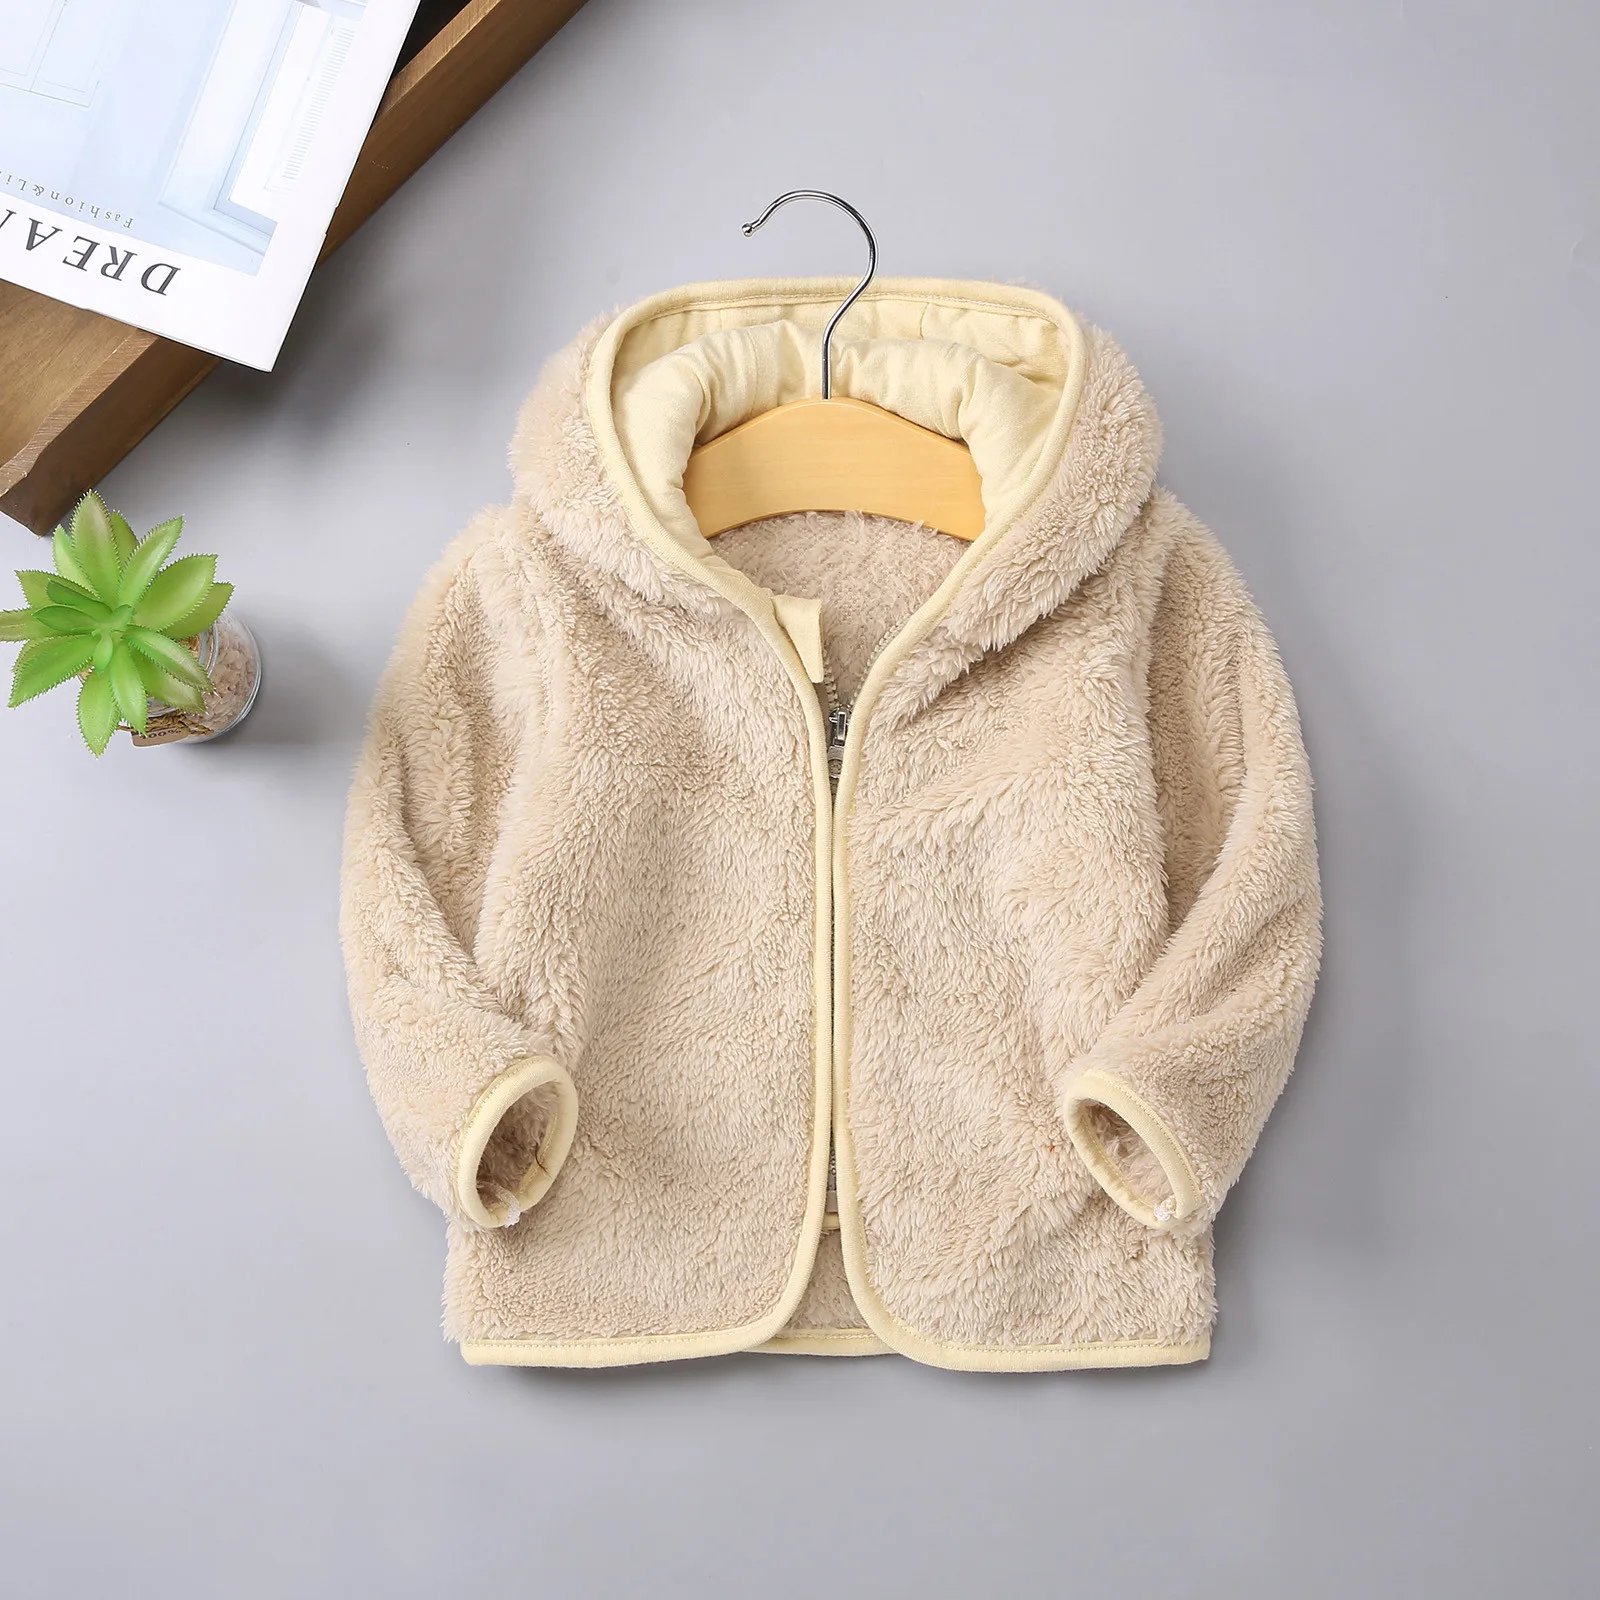 Baby Boys Girls Winter jacket Infant Warm Clothes Windproof Hooded Coat Toddler Flannel Outwear Children Clothing Baby Coats